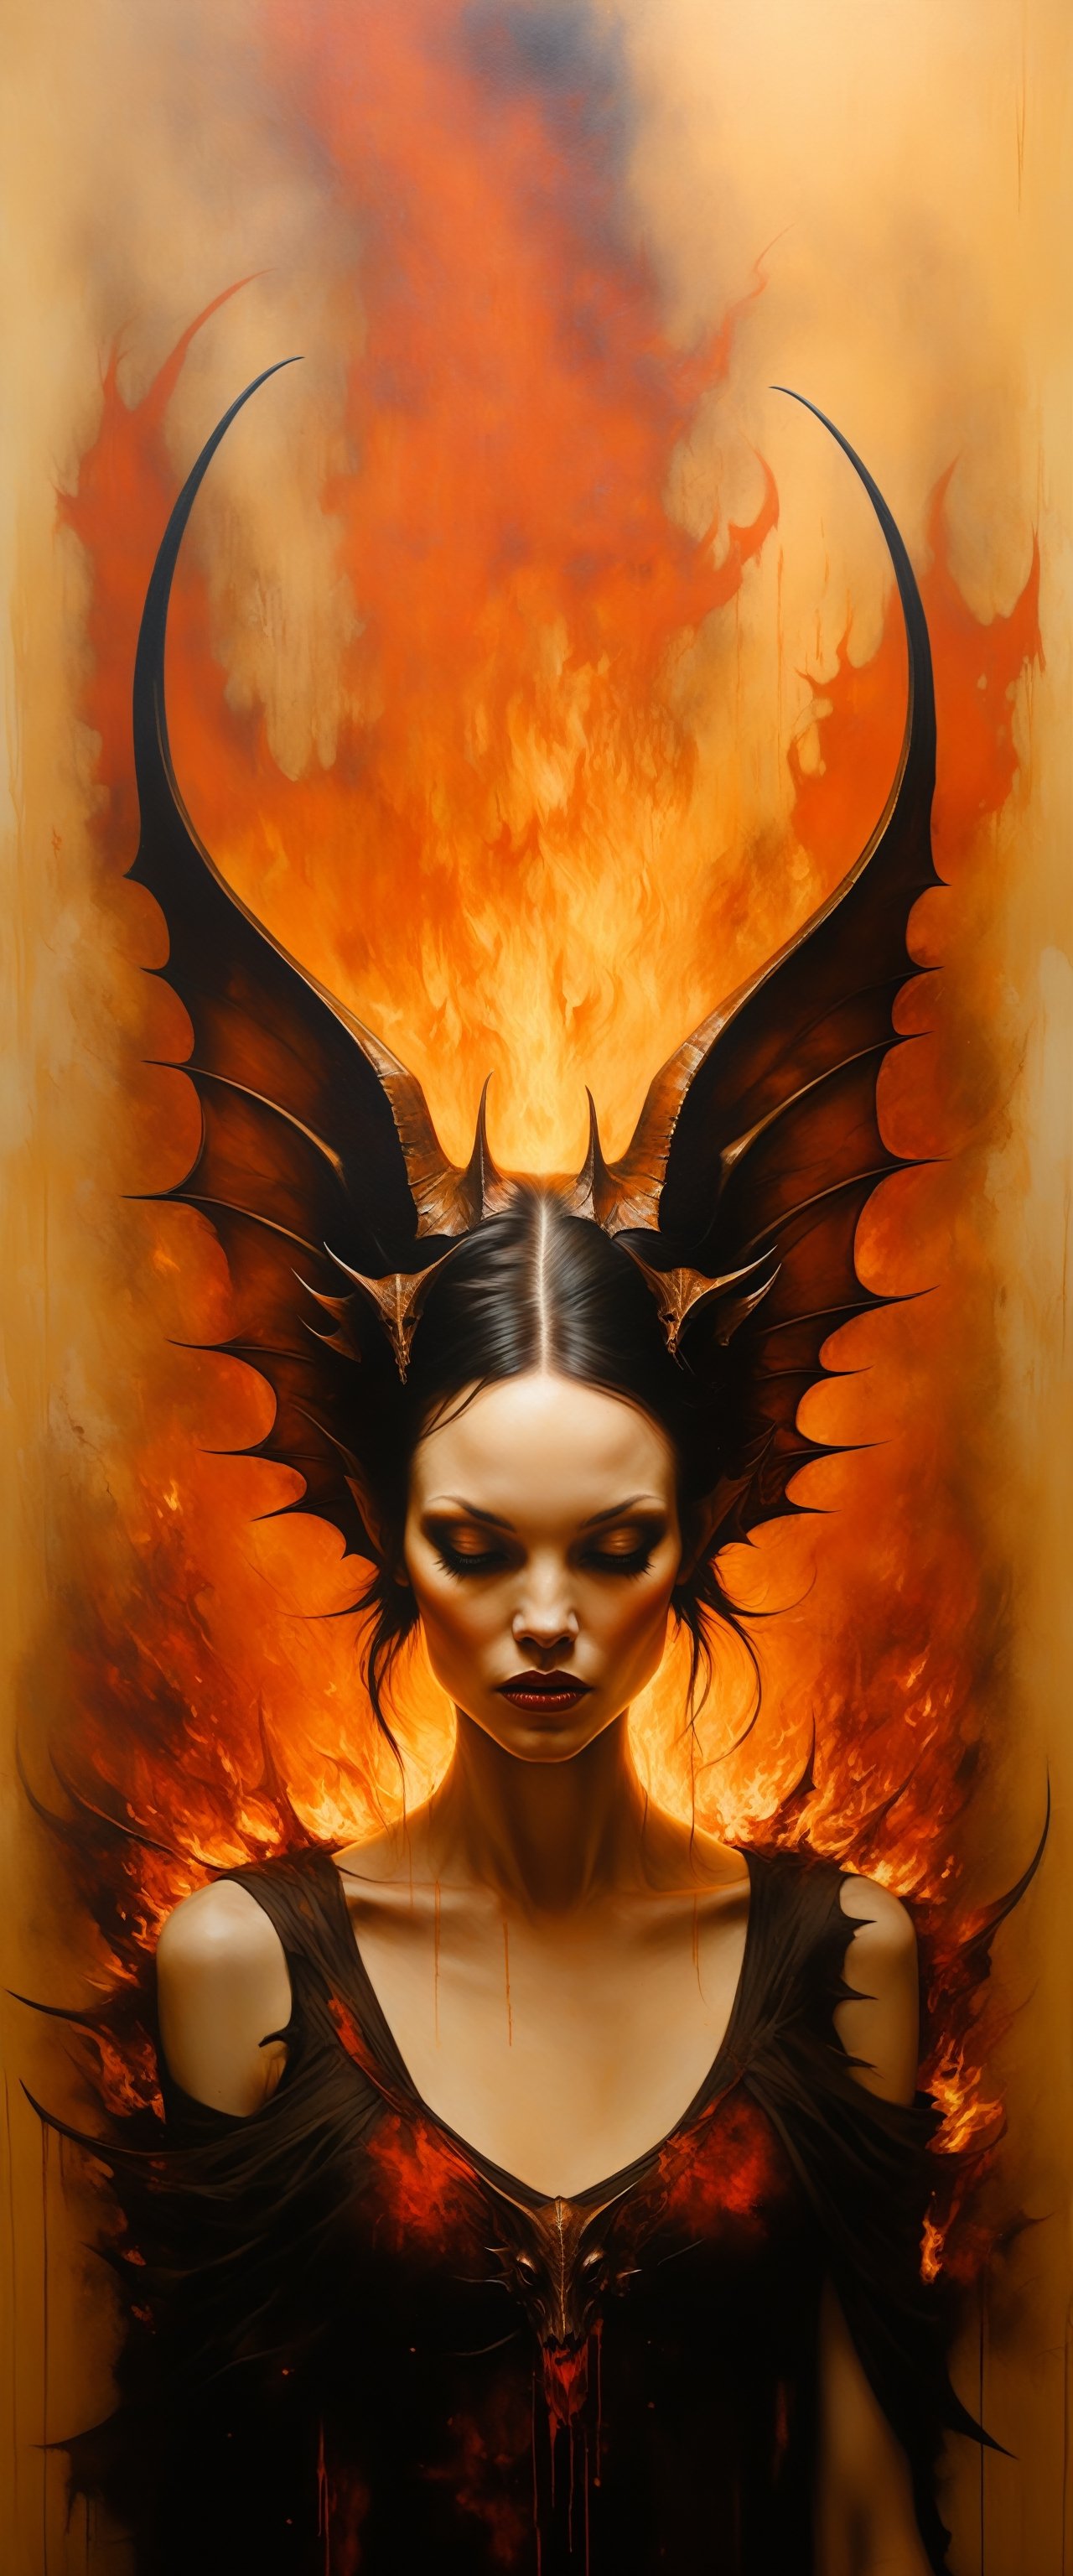 highly detailles concept art, a painting of a succubus surrounded by flames, graffiti art, inspired, horns, wings, burning heavely, red and orange, 

aesthetic portrait, detailmaster2